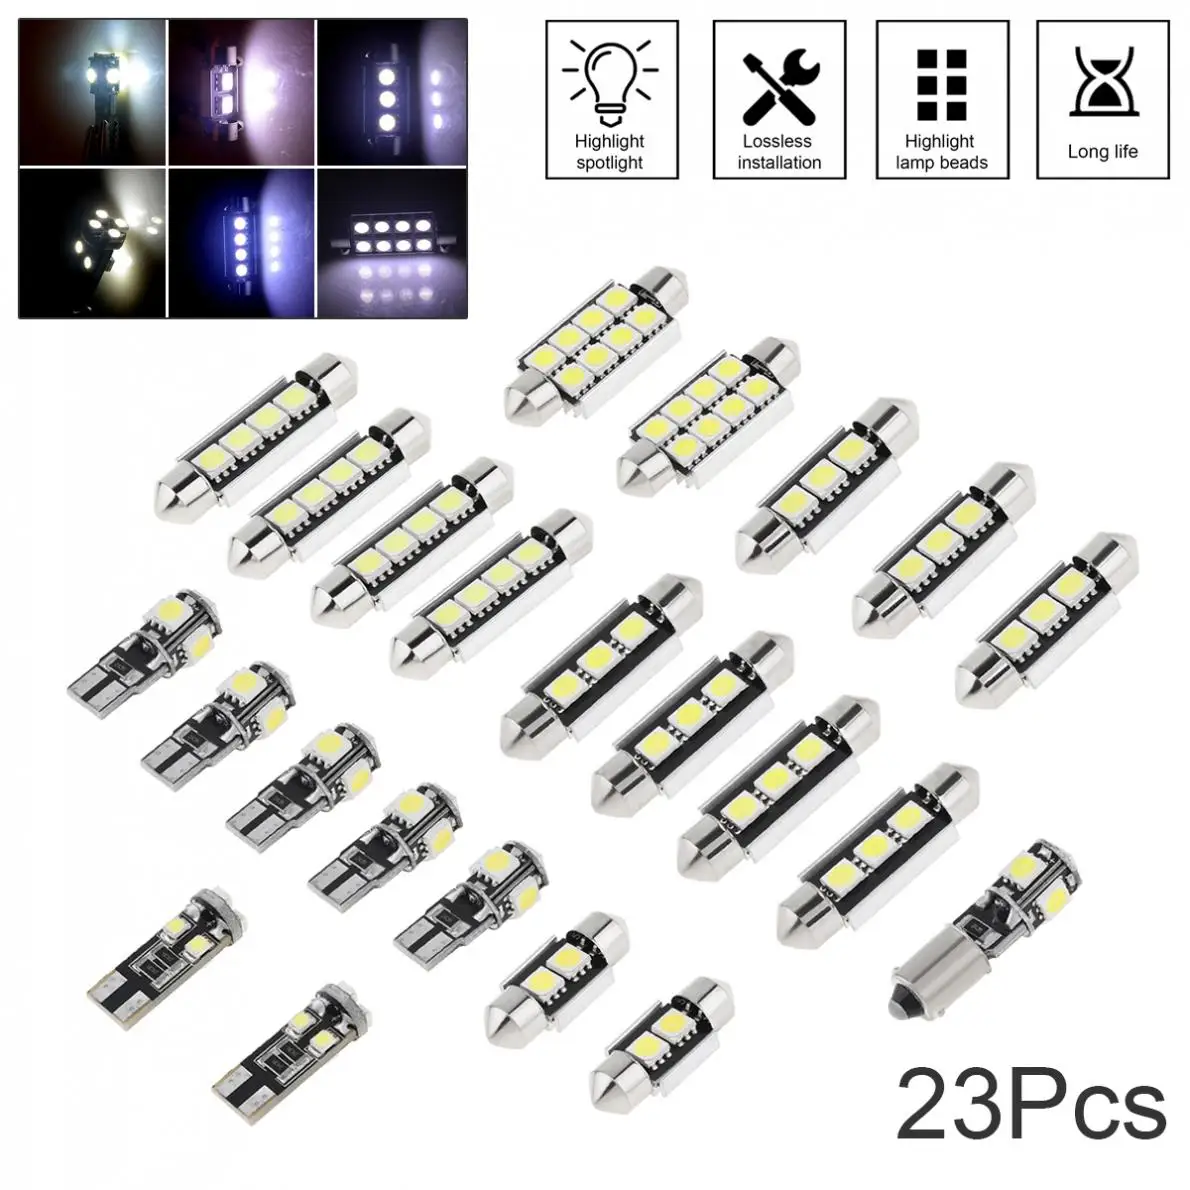 

23pcs T10 5050 W5W Canbus LED Car Interior Inside Light Dome Trunk Map License Plate Lamp Bulb